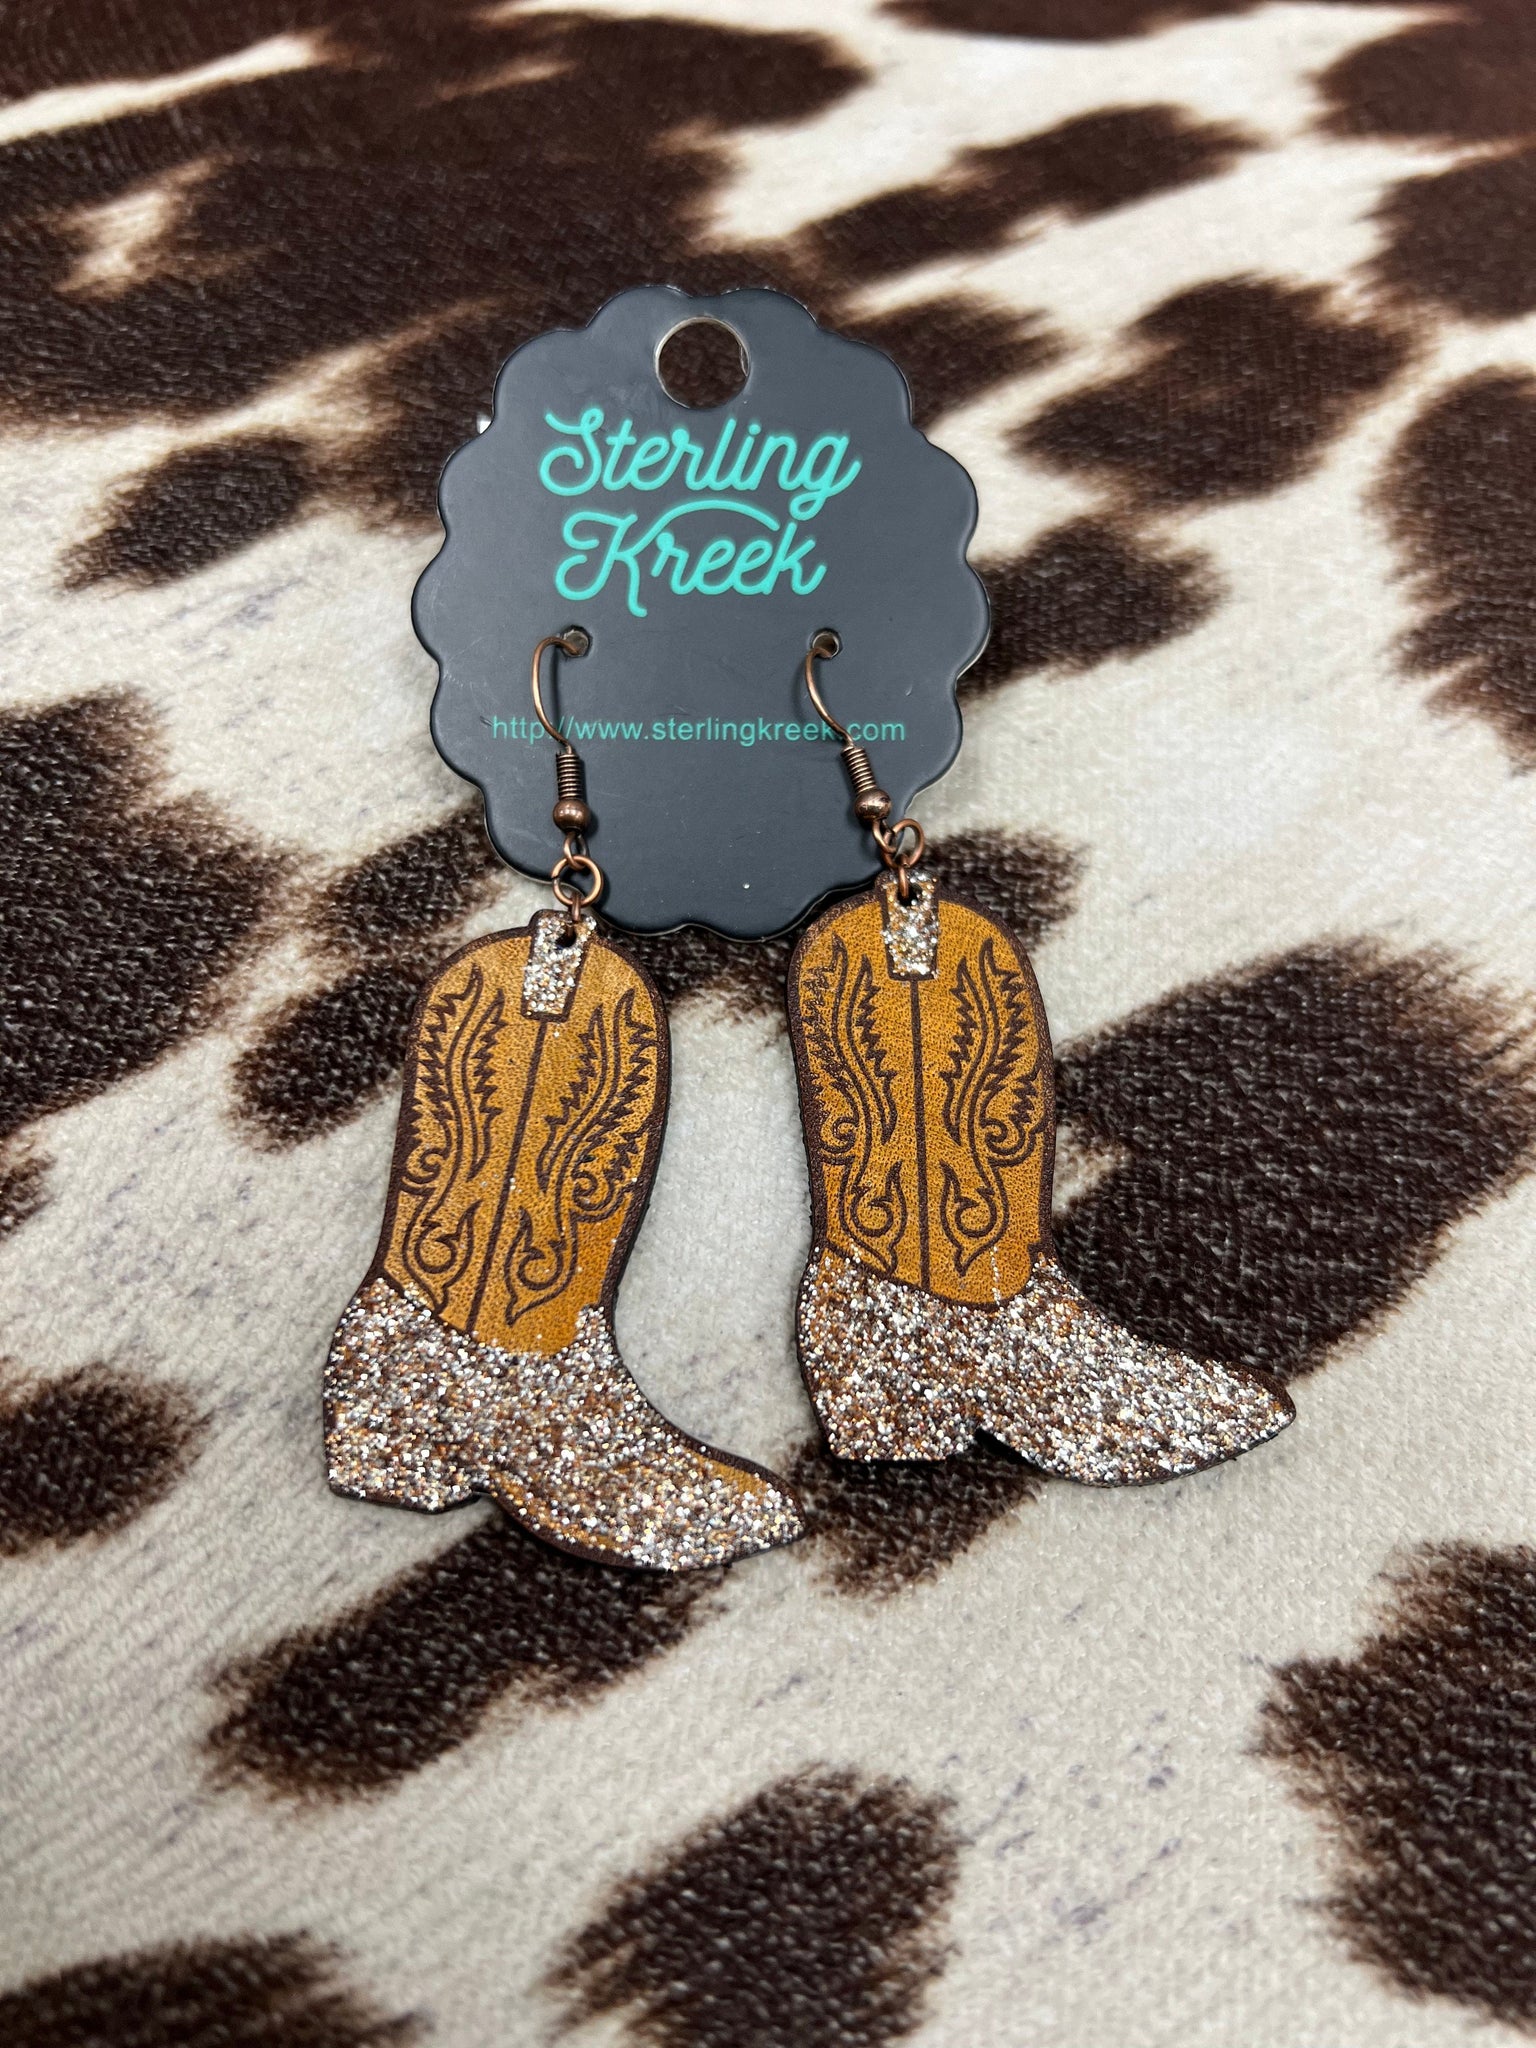 Kick the Dust Up Boot Earrings The Sparkly Pig